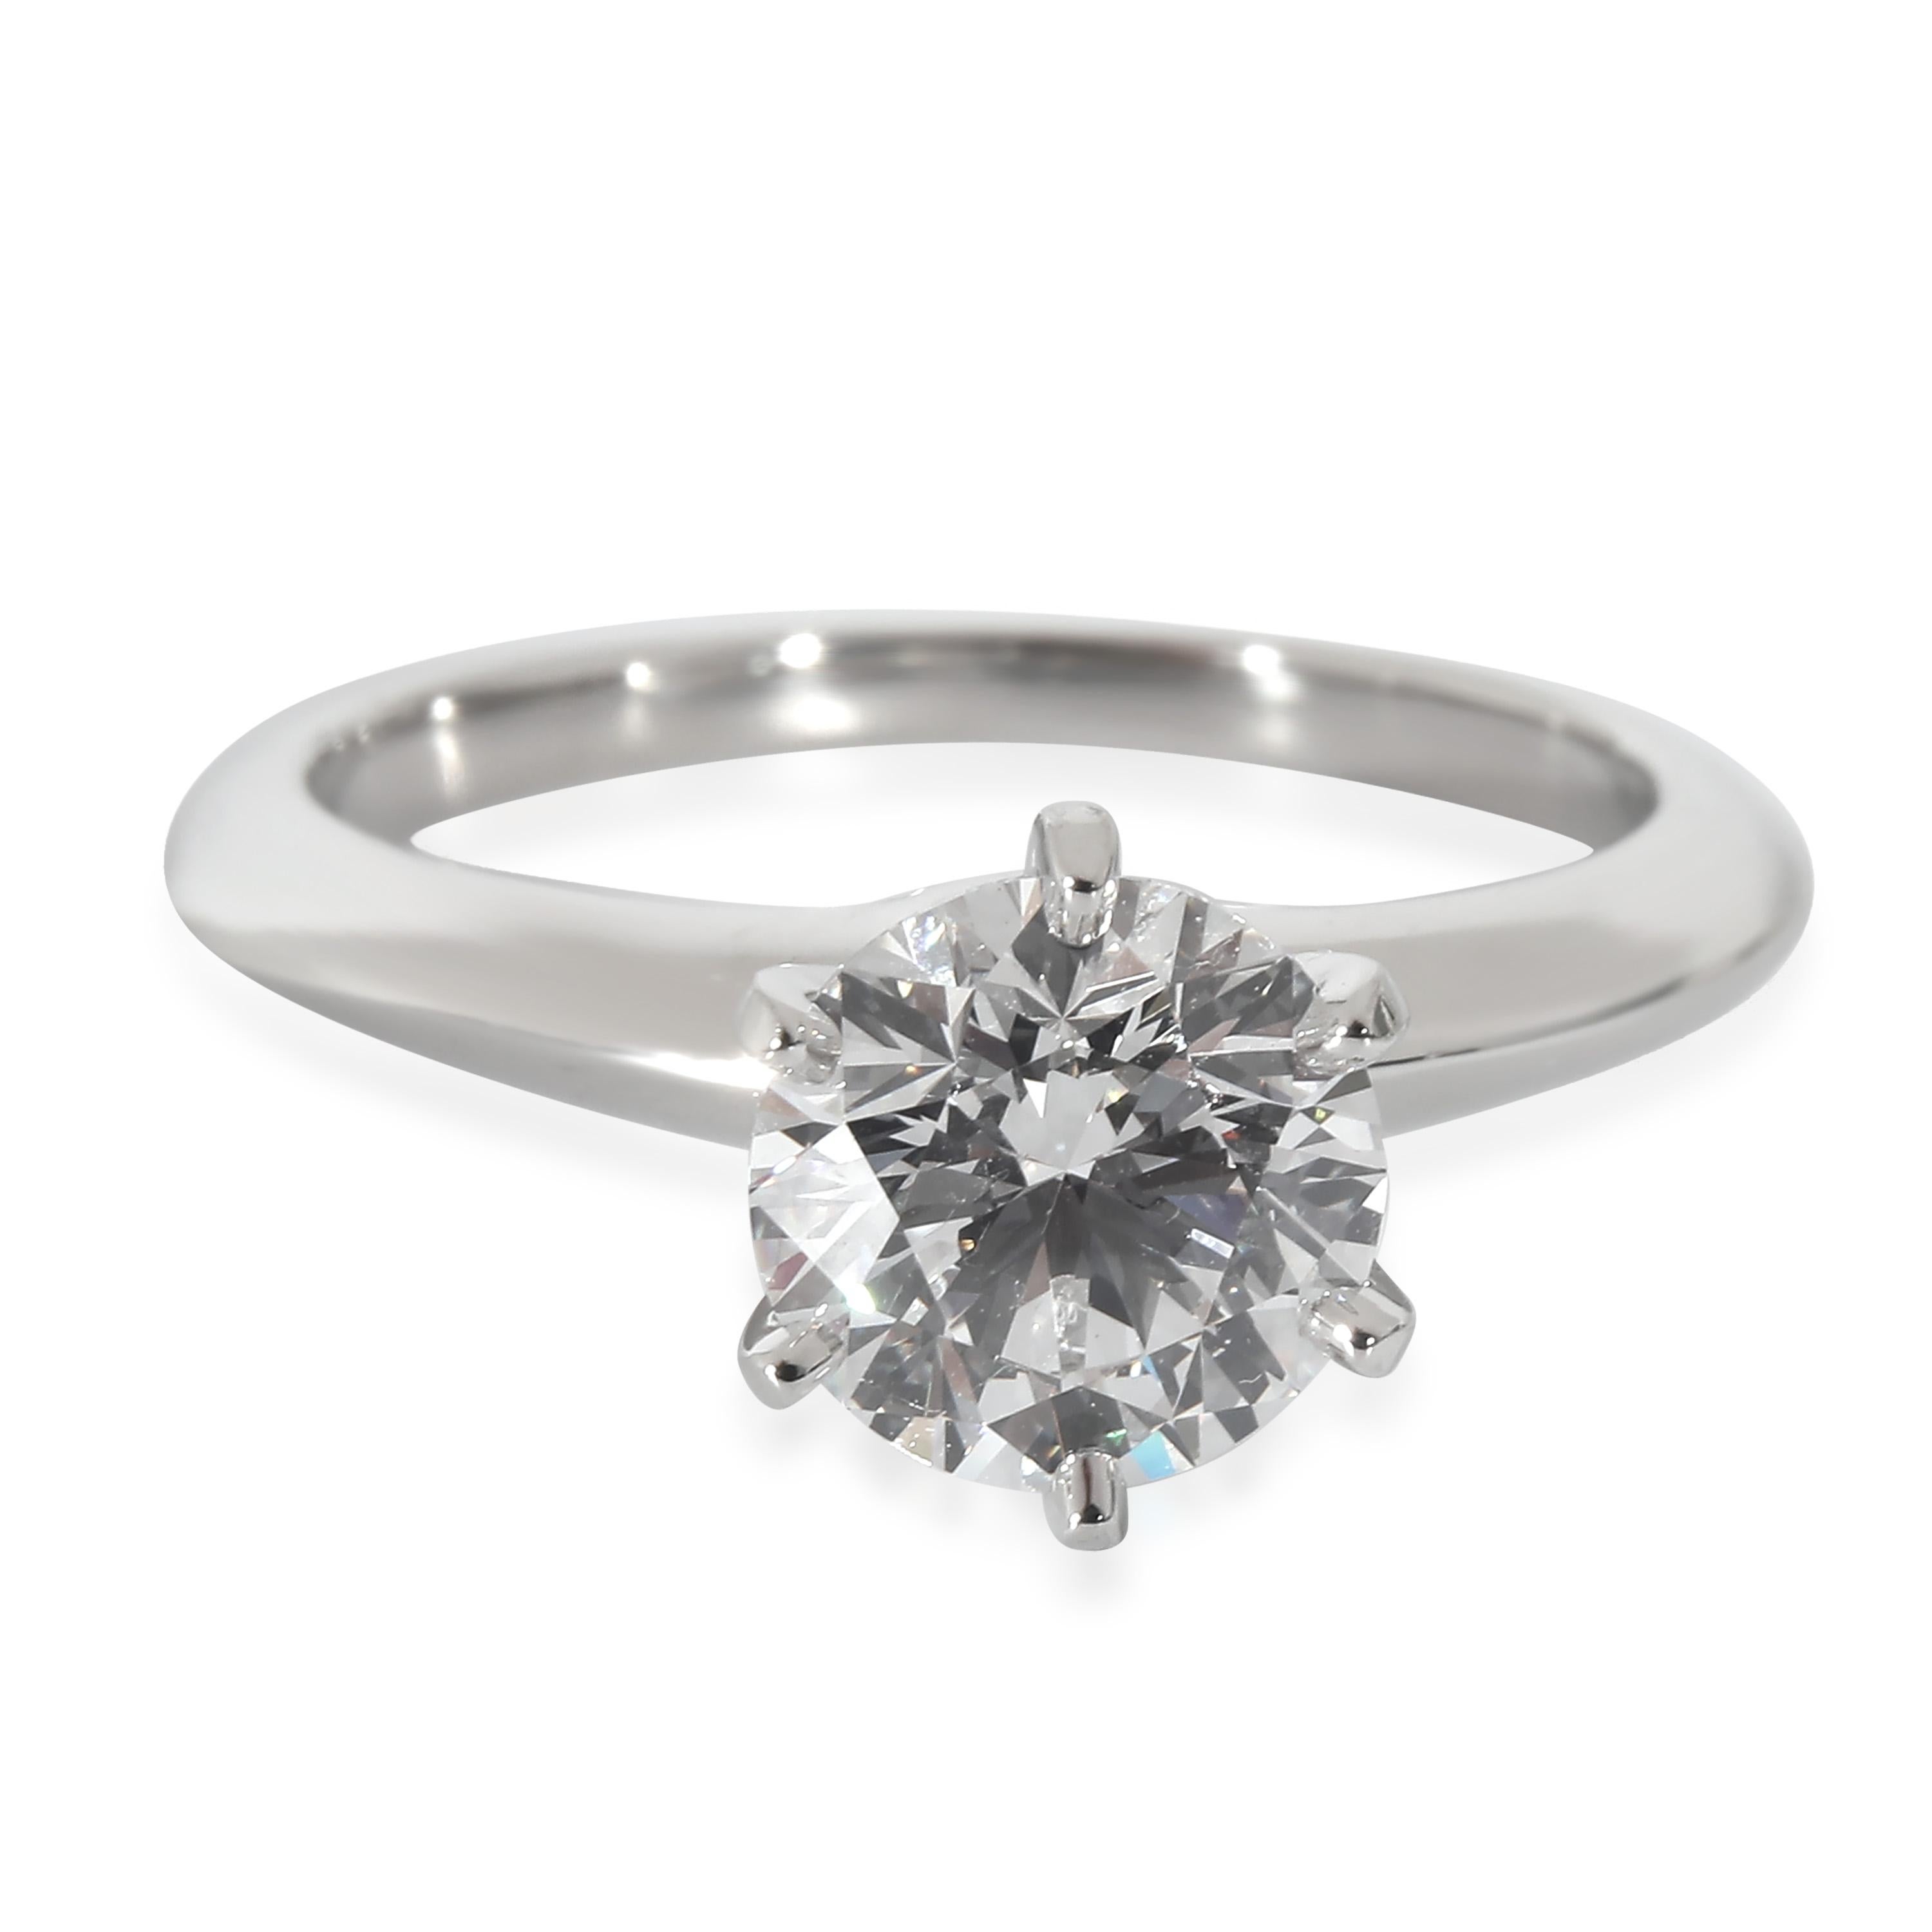 Tiffany & Co. Diamond Engagement Ring in  Platinum E VS2 1.29 CTW For Sale 1